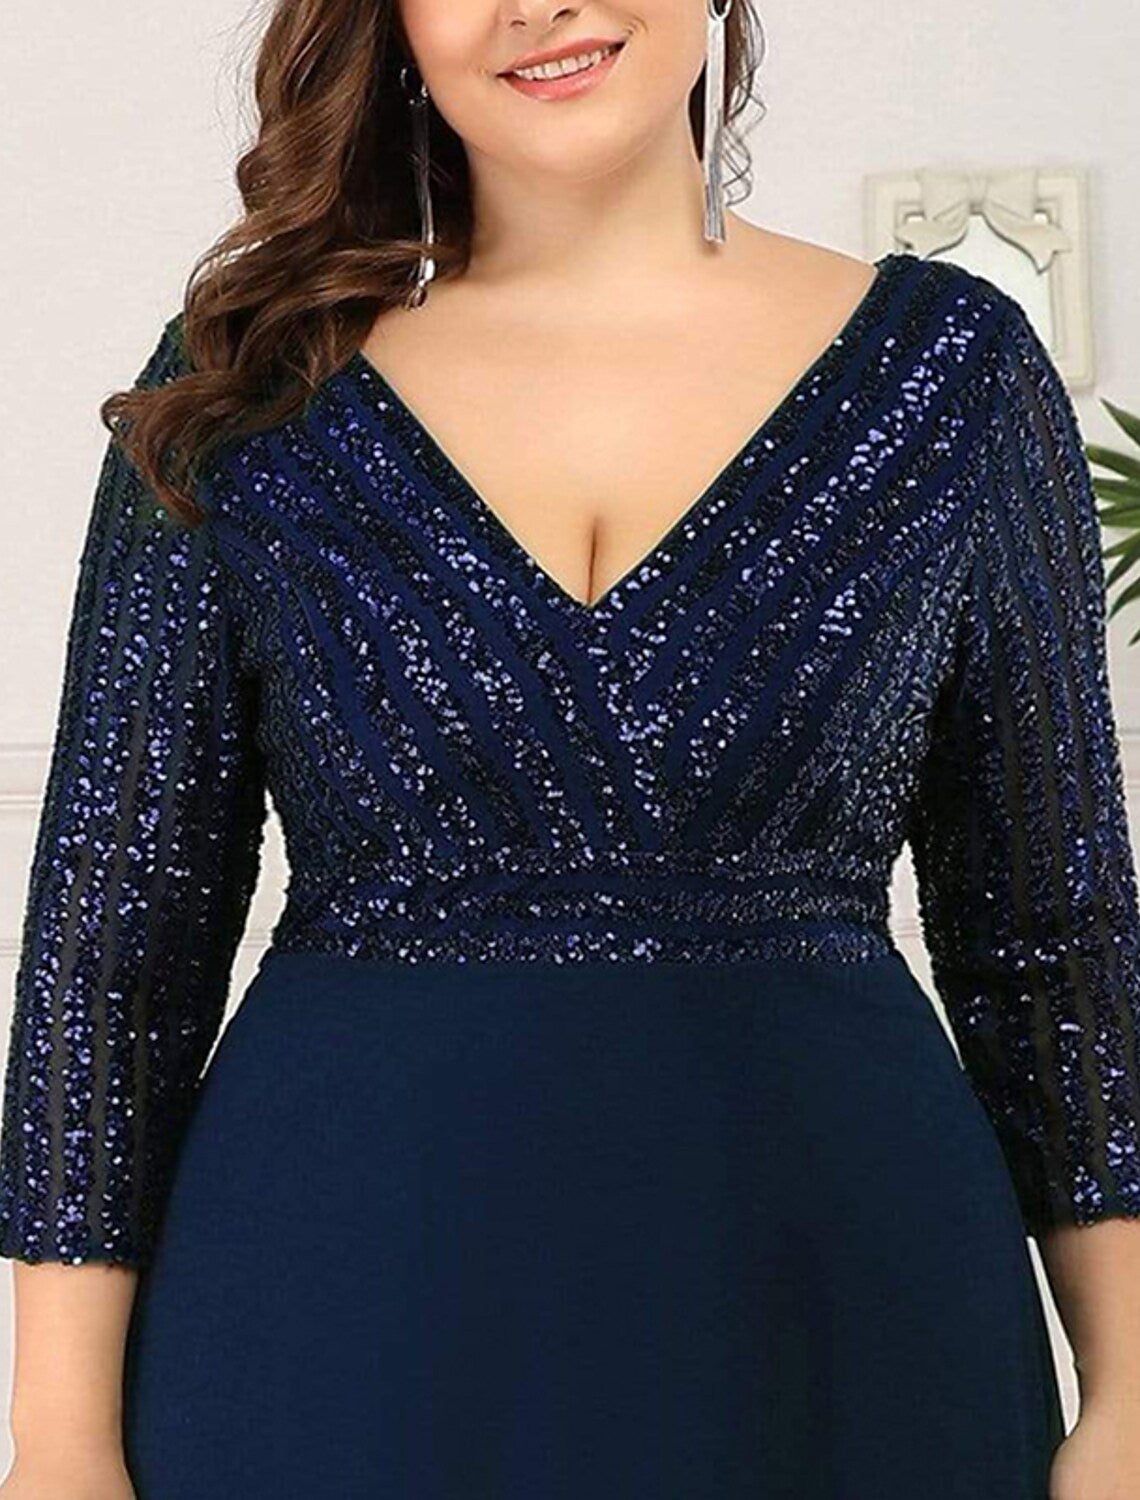 A-Line Evening Gown Plus Size Dress Wedding Guest Floor Length  Length Sleeve V Neck Chiffon V Back with Sequin